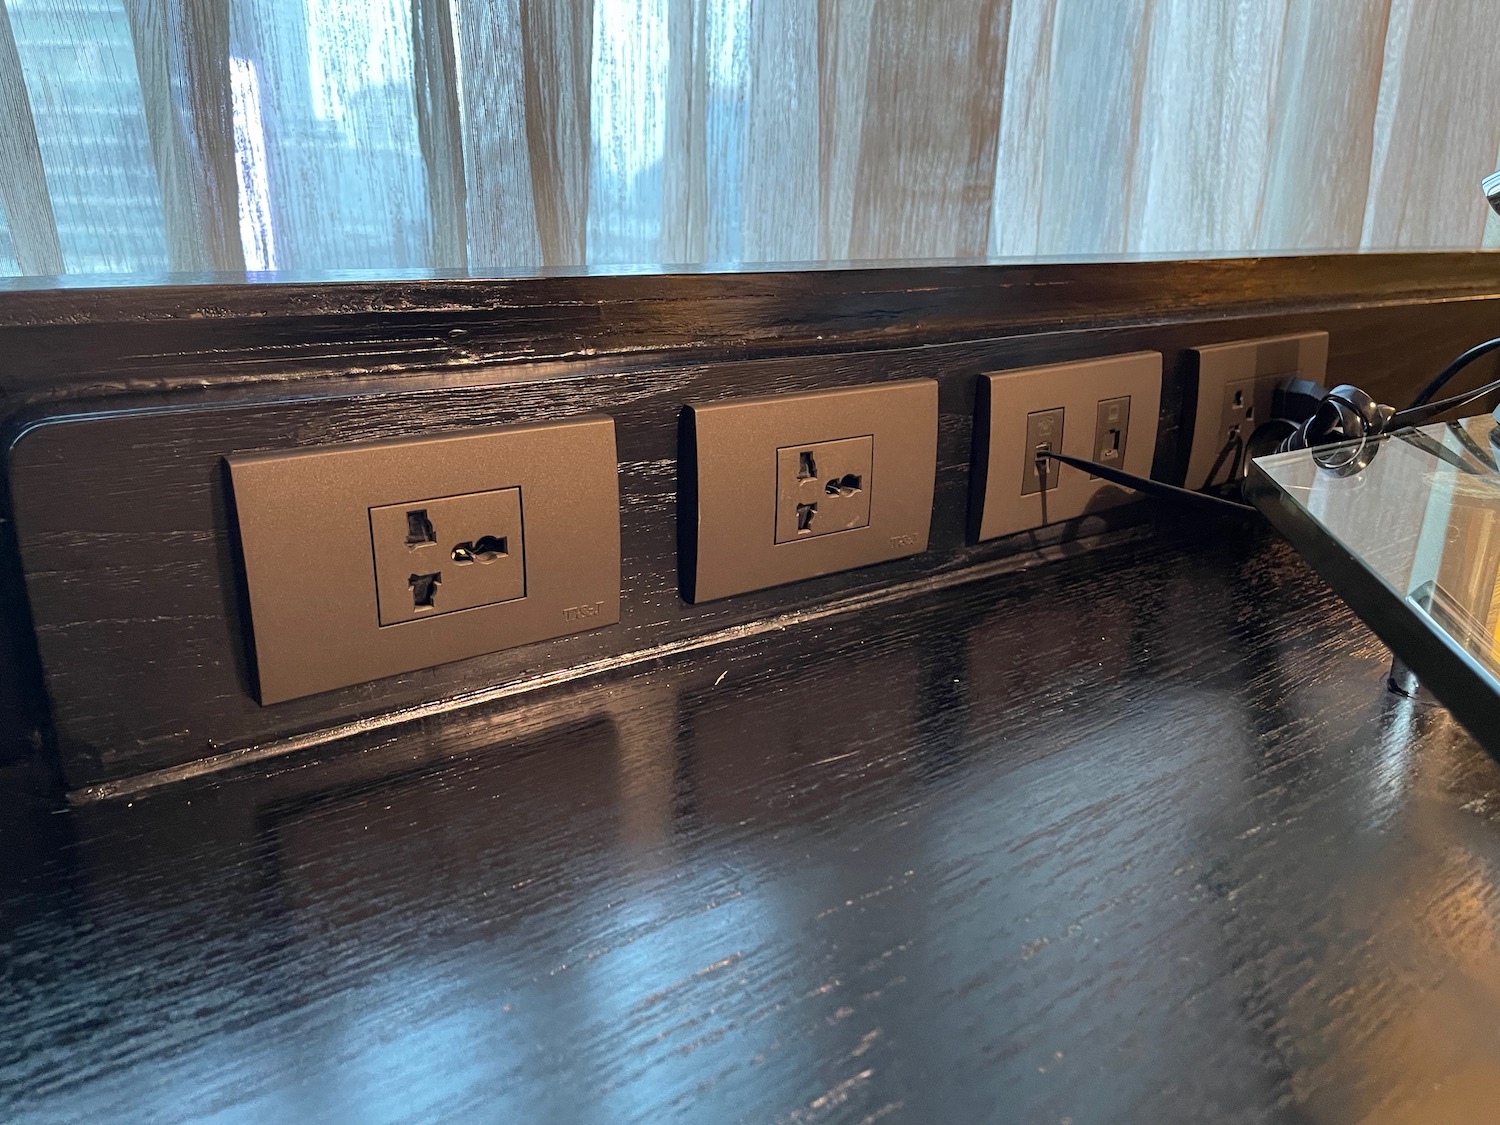 a row of electrical outlets on a wood surface